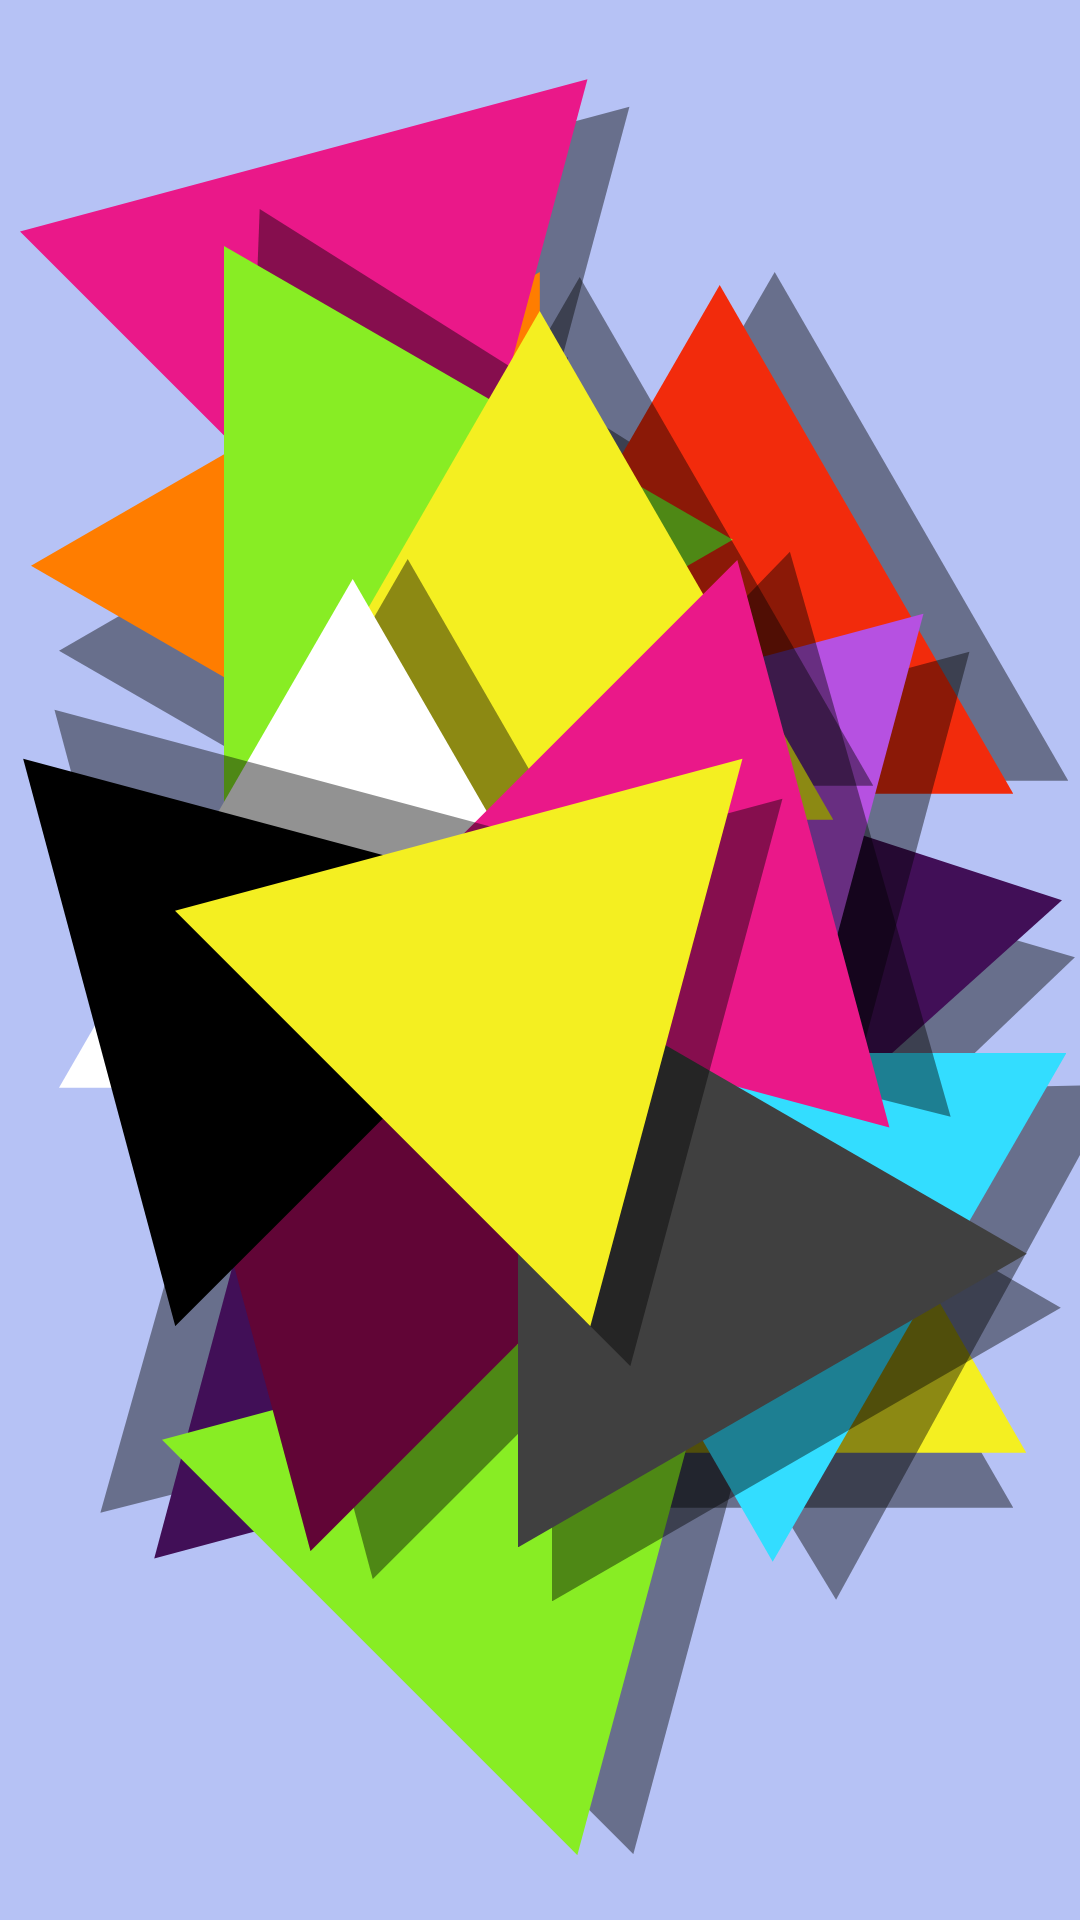 Rainbow series (dropping triangles [Purple (light) background]) by Voey